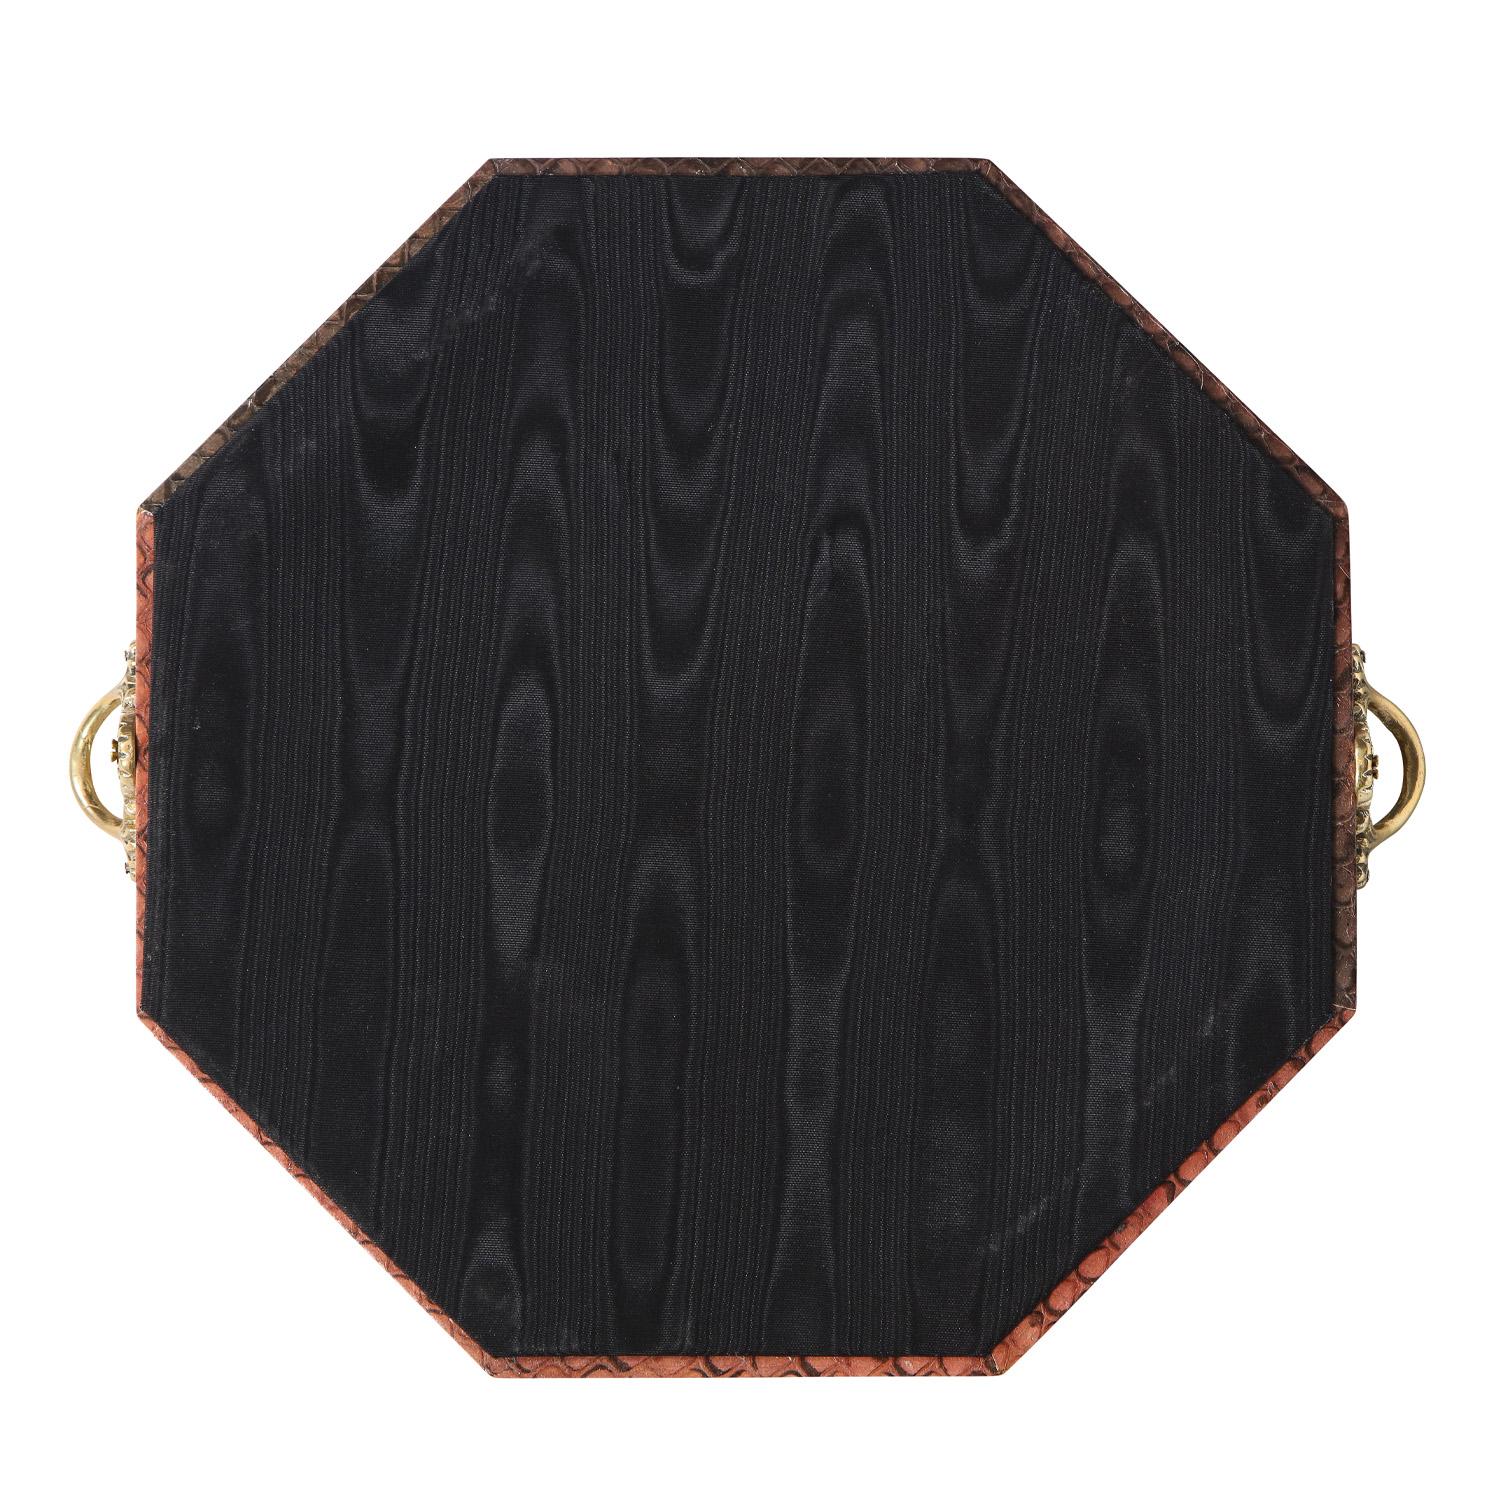 Lobel Originals Octagonal Tray in Plum, Gray and Sunflower Python, New In New Condition For Sale In New York, NY